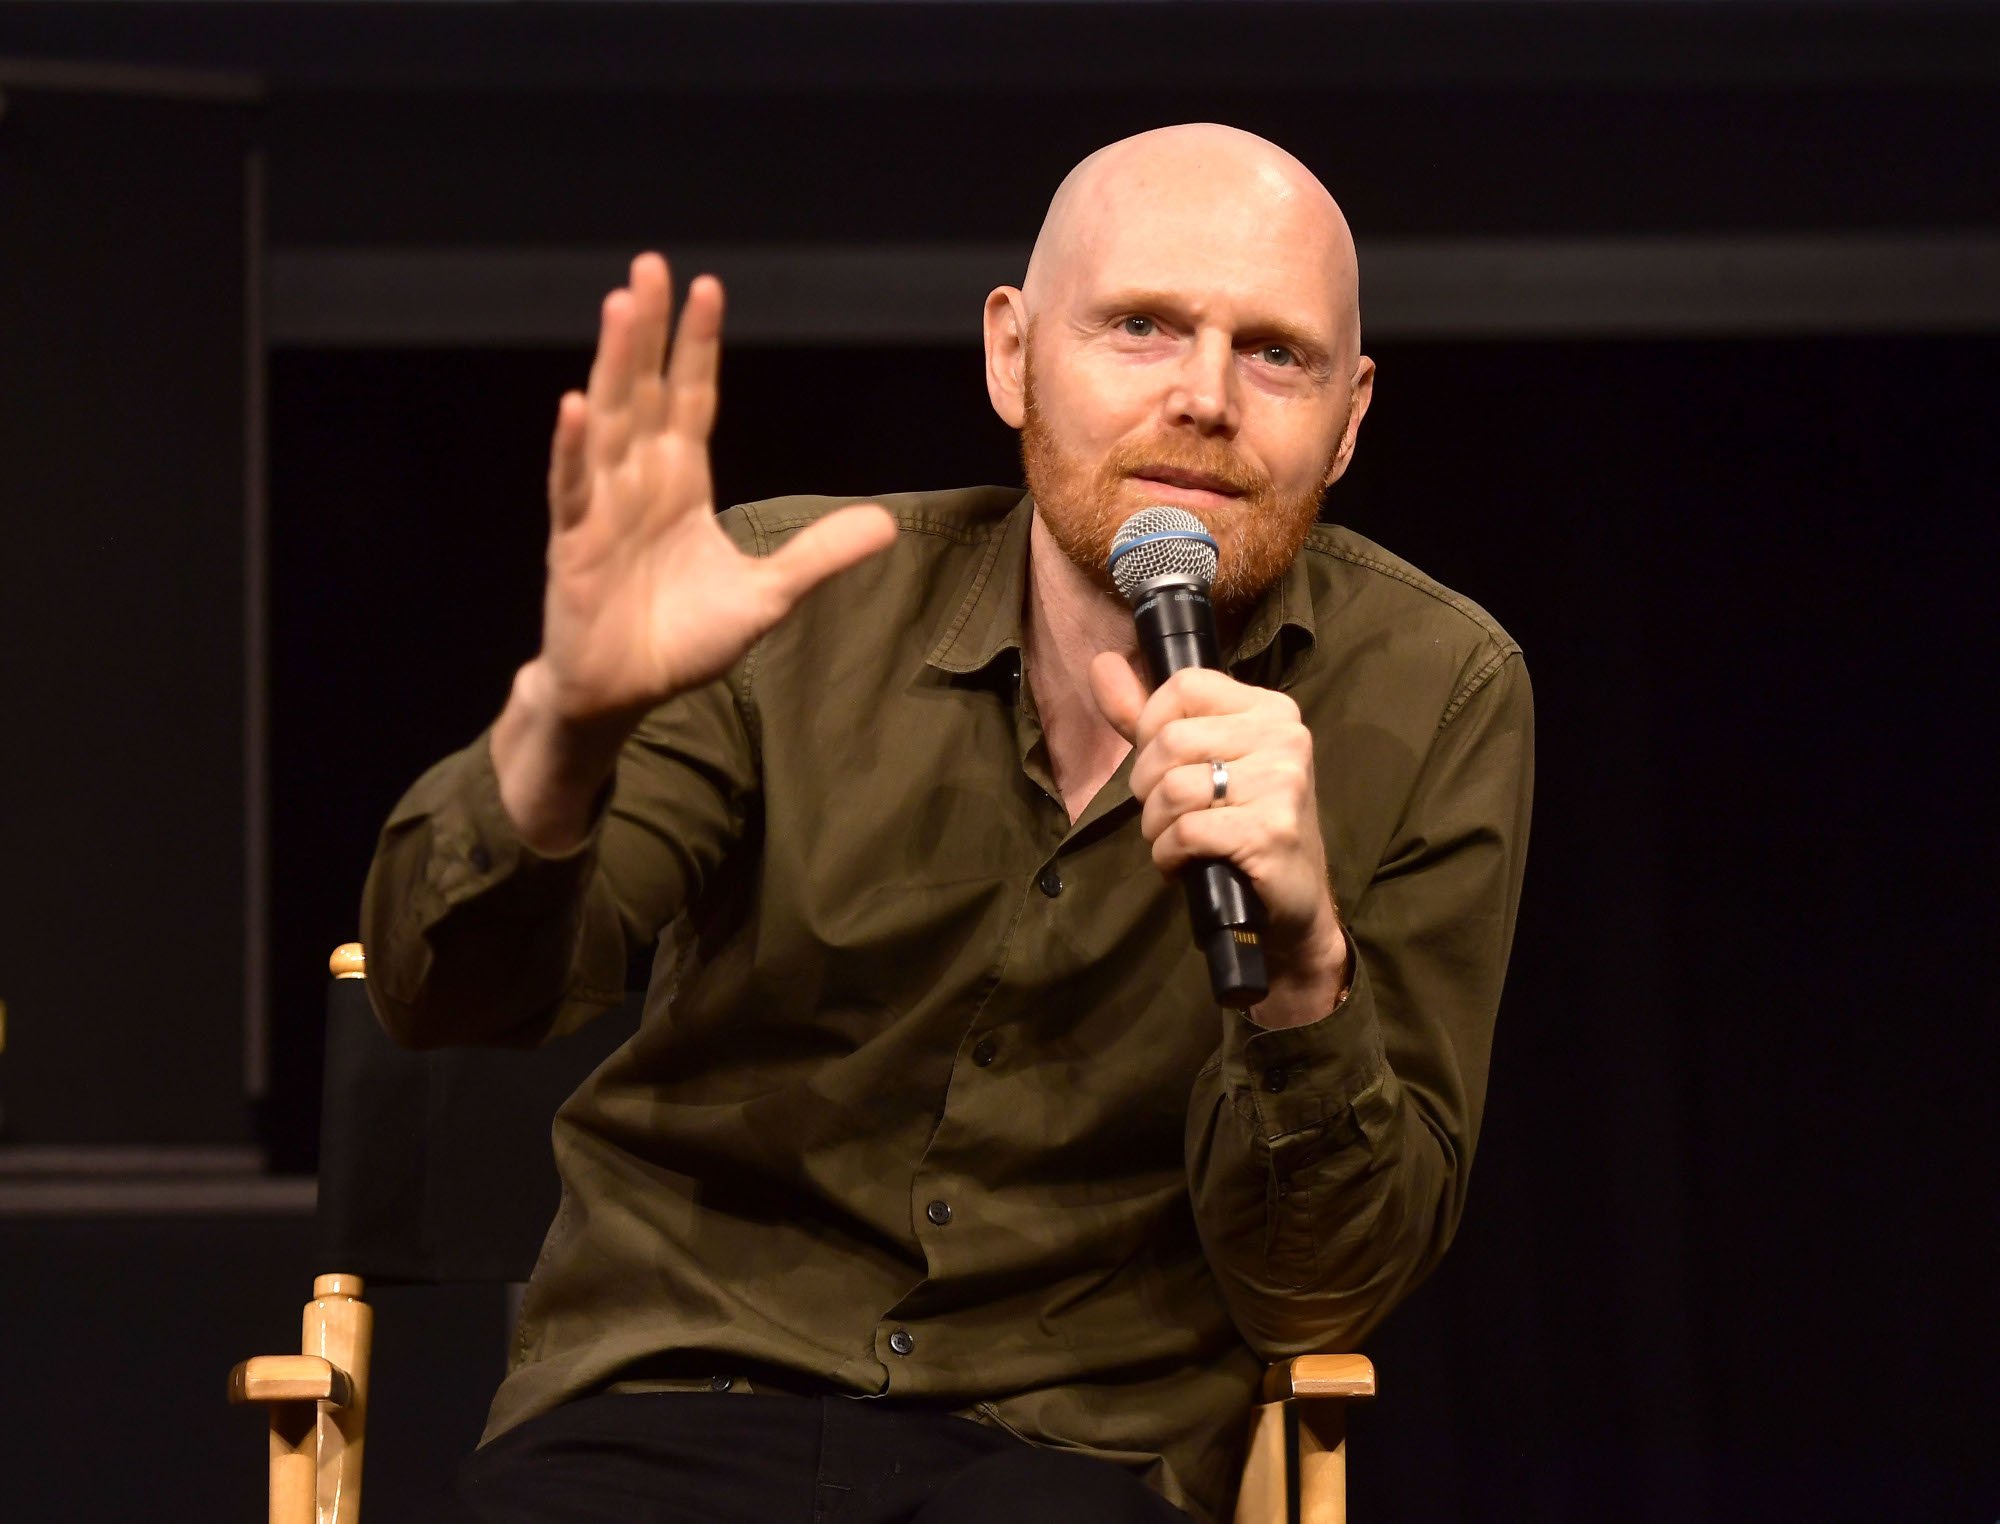 Bill Burr wearing a brown shirt, holding one hand up, and speaking into a microphone